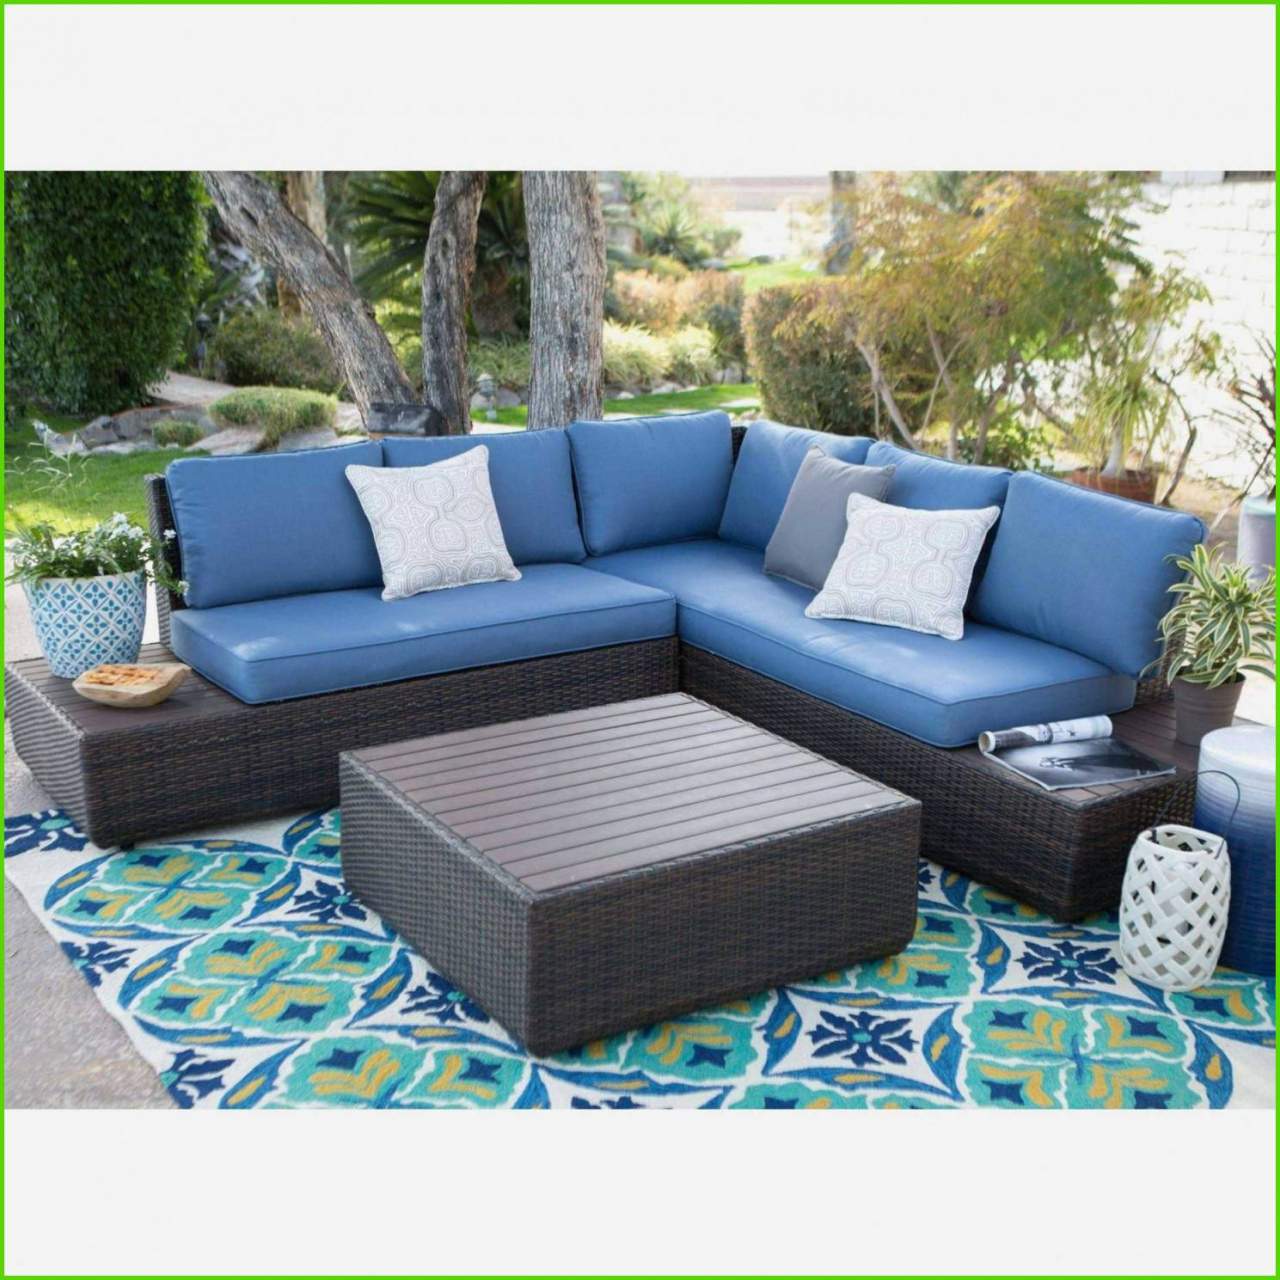 outdoor daybed lounge sofa garten rattan garten lounge rattan lounge weiss elegant durch outdoor daybed